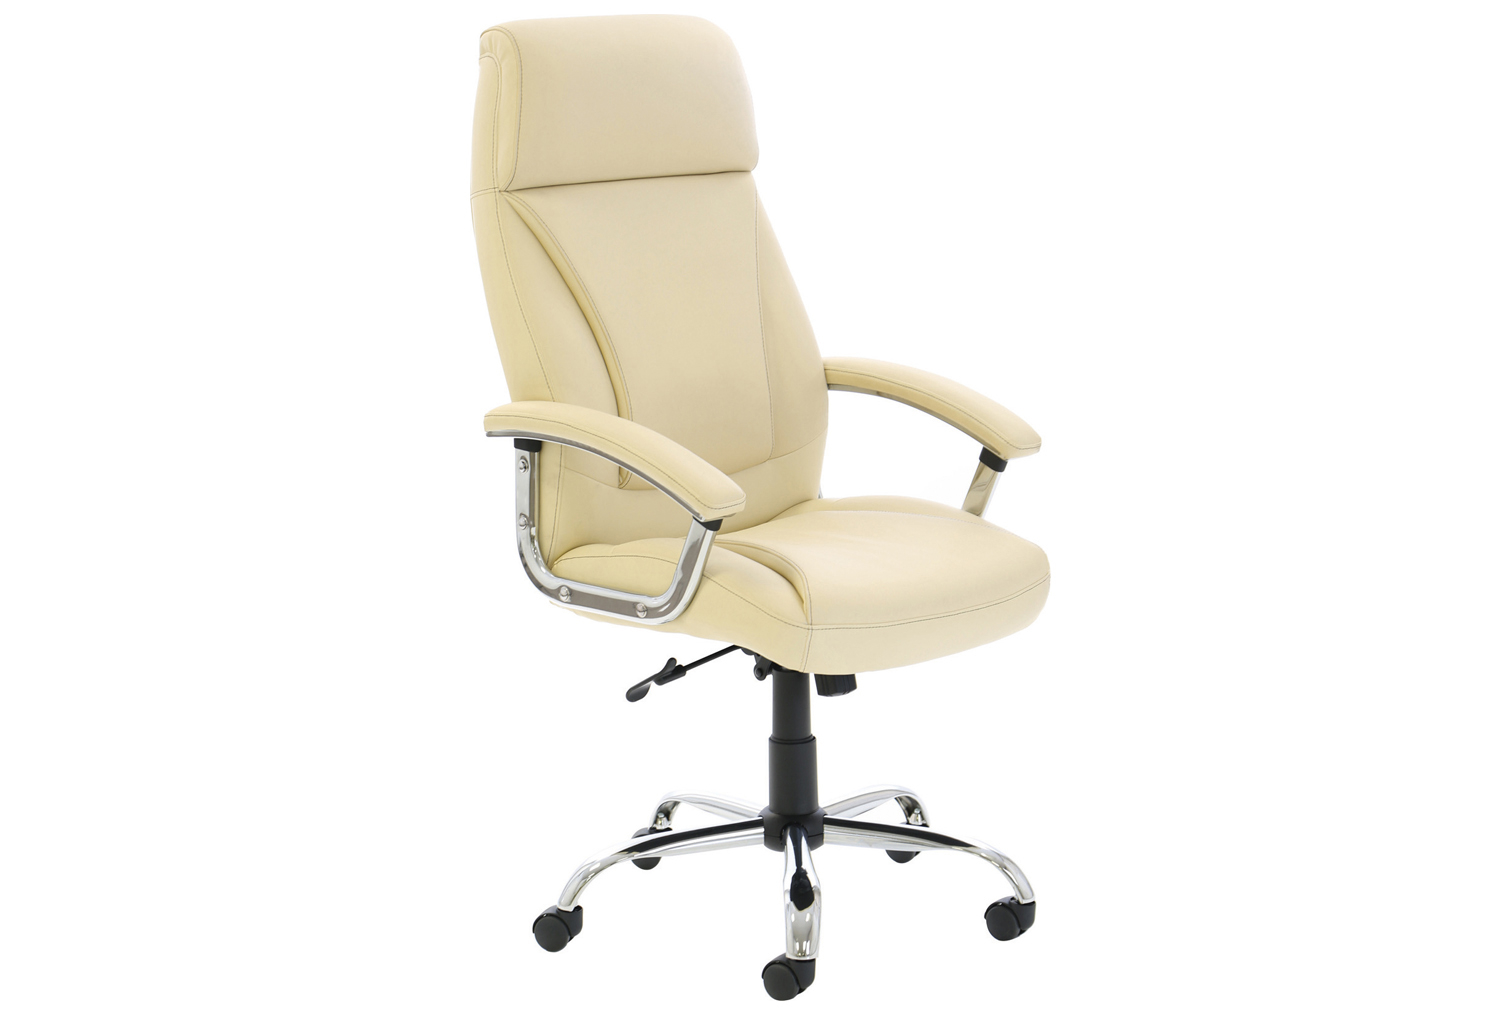 Penza High Back Executive Cream Leather Office Chair, Fully Installed